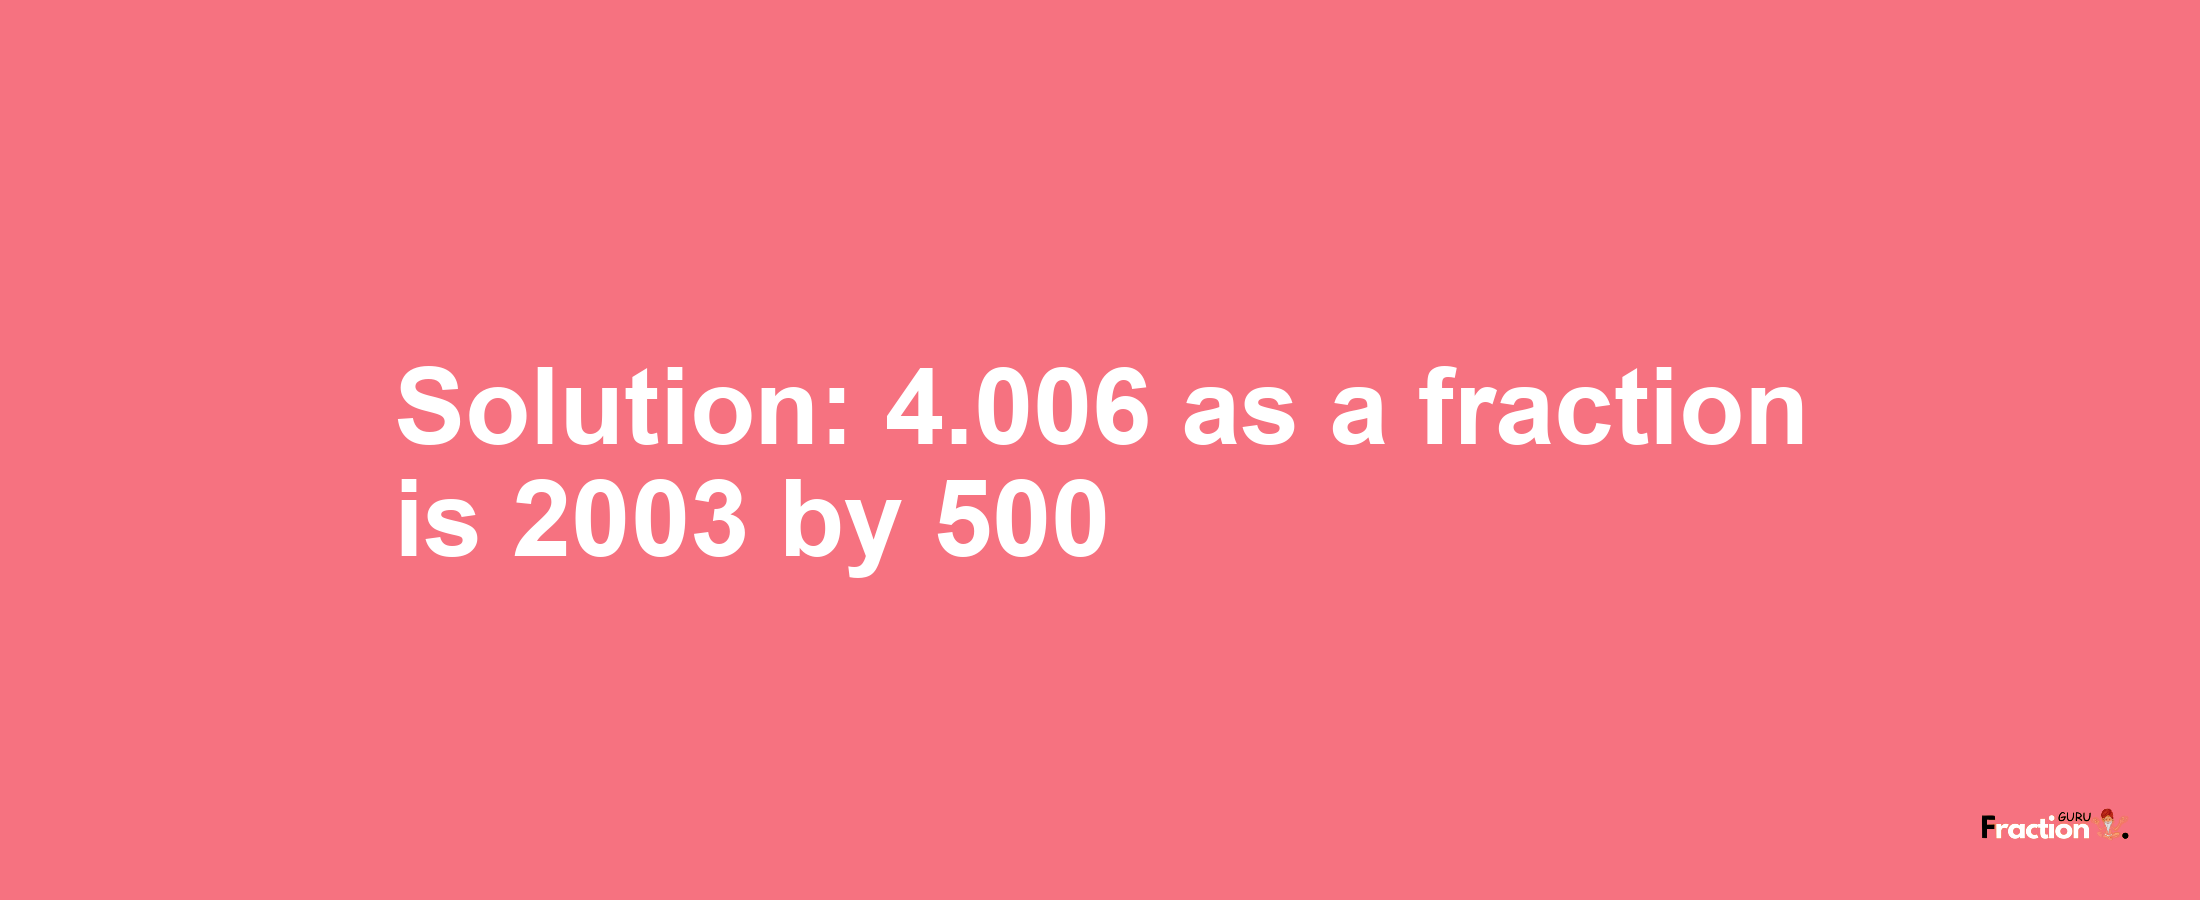 Solution:4.006 as a fraction is 2003/500